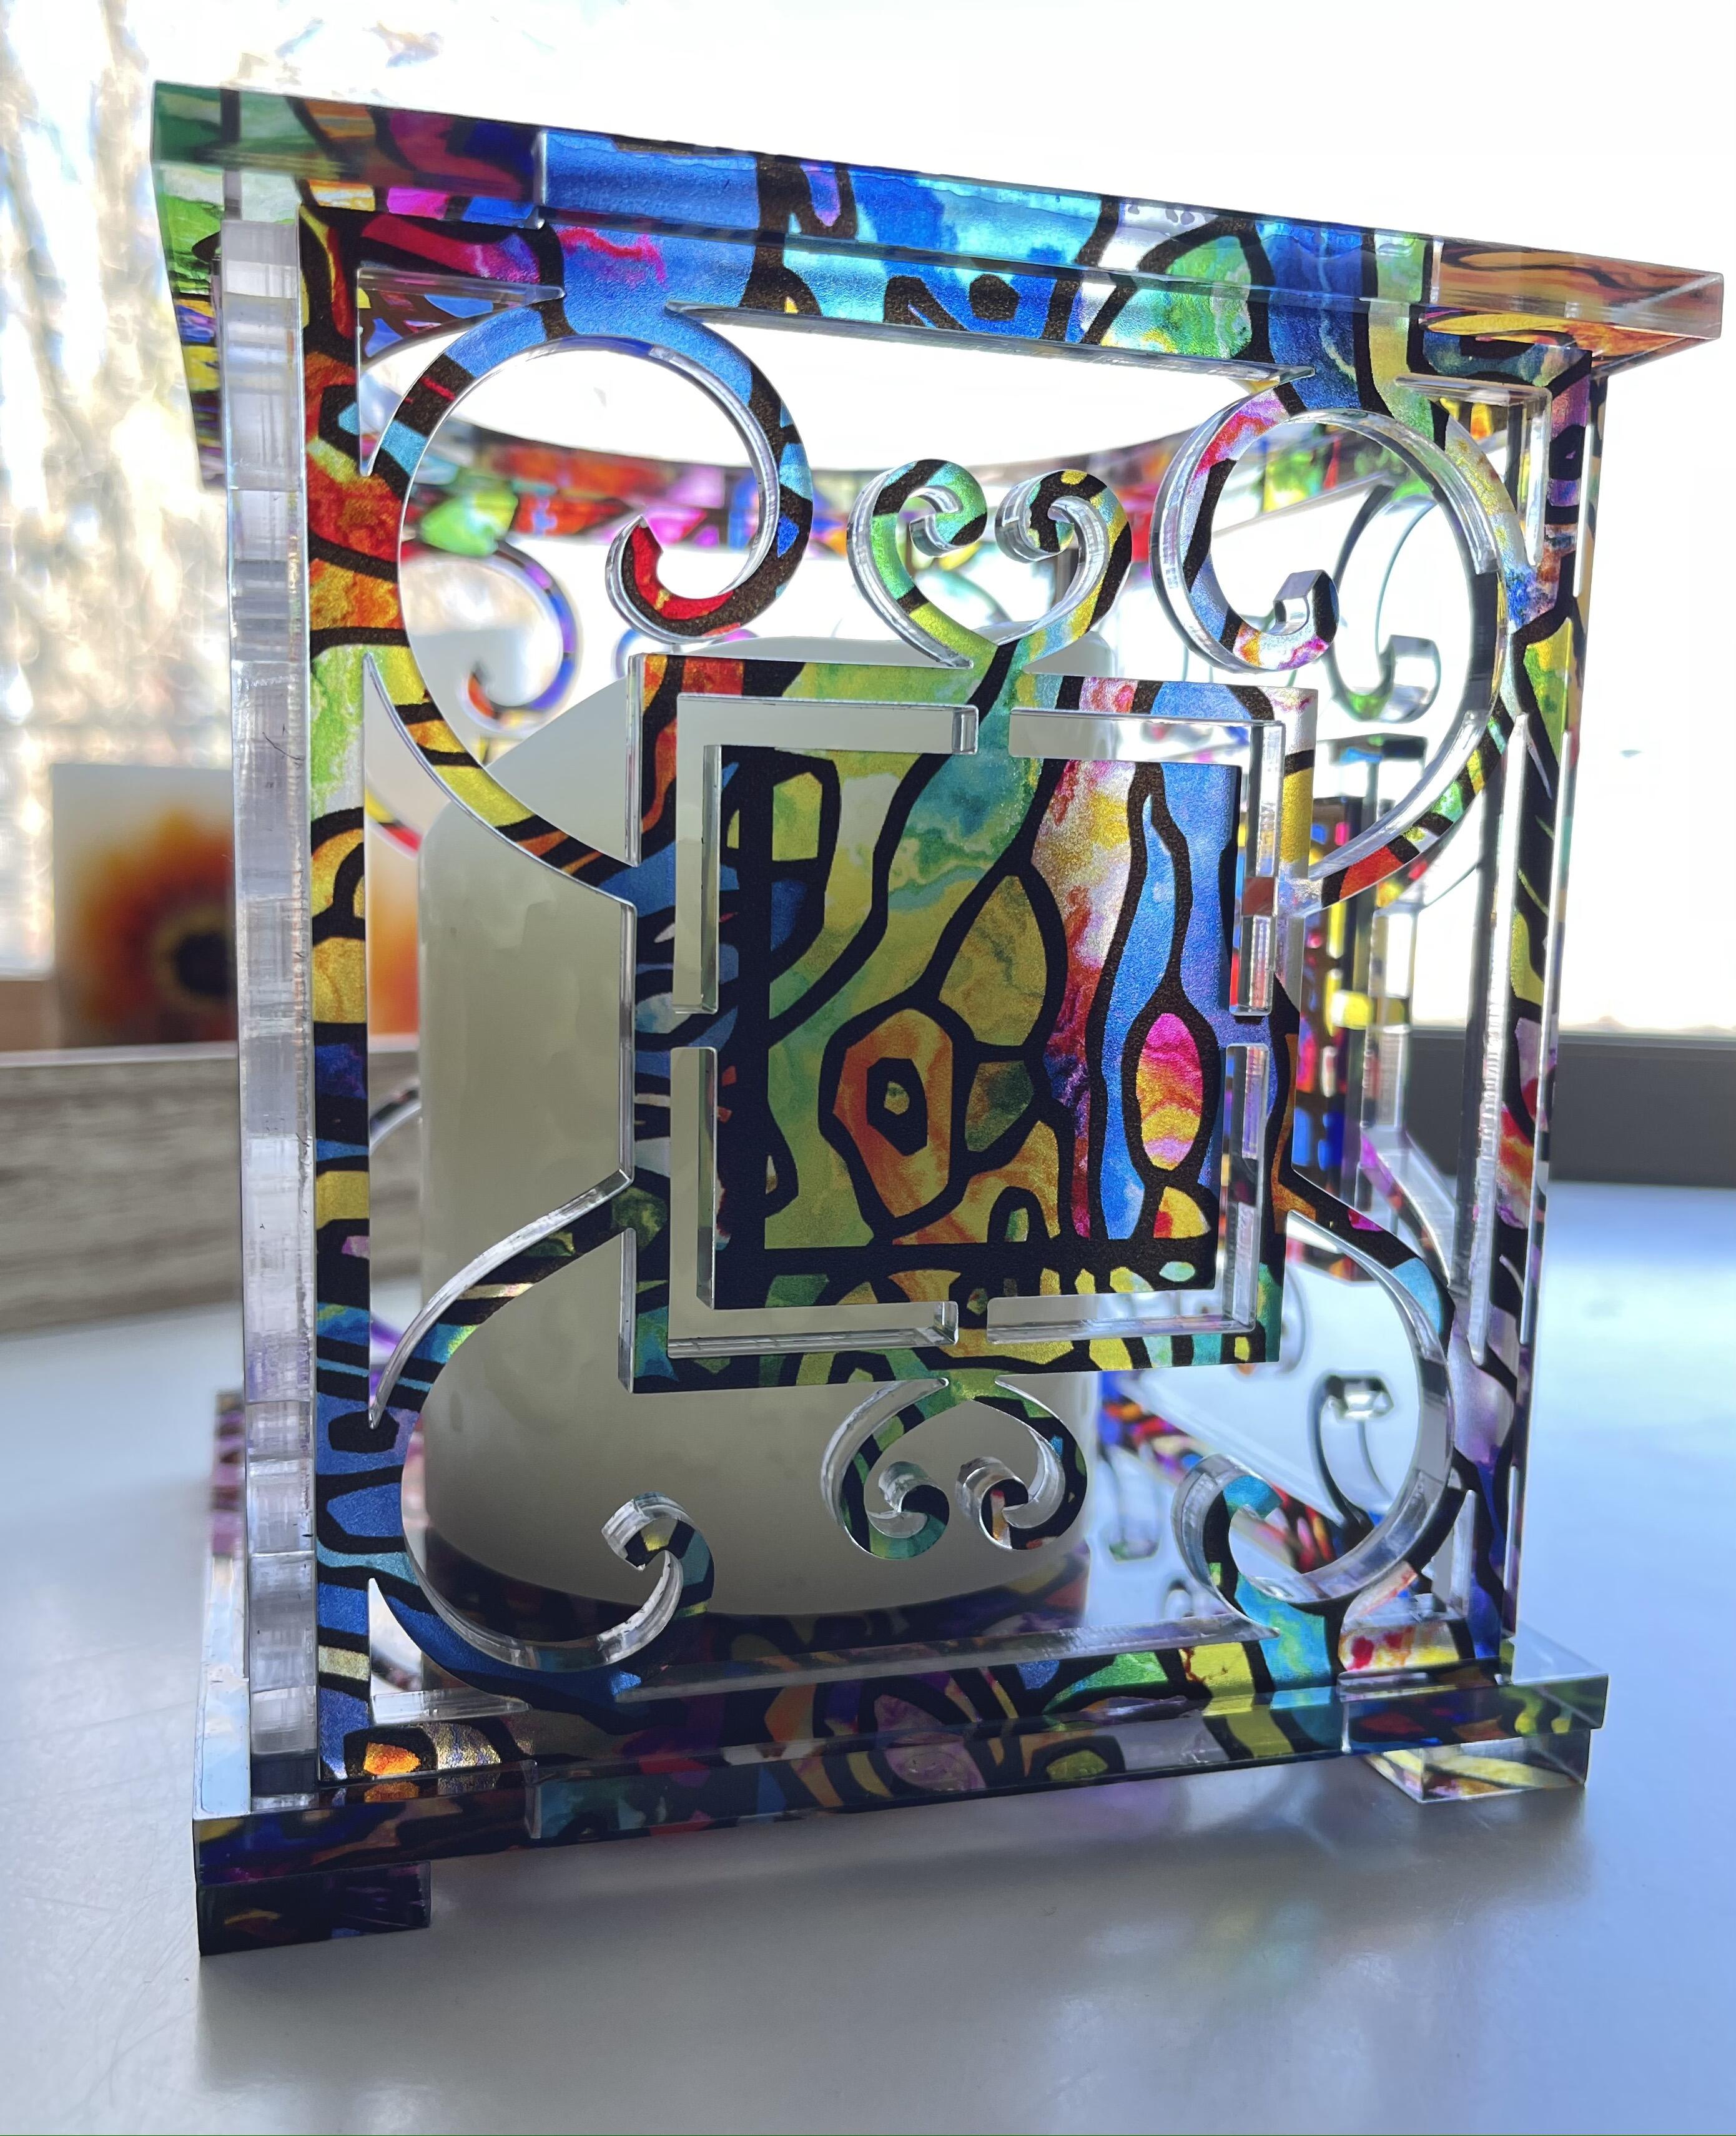 stained glass lantern